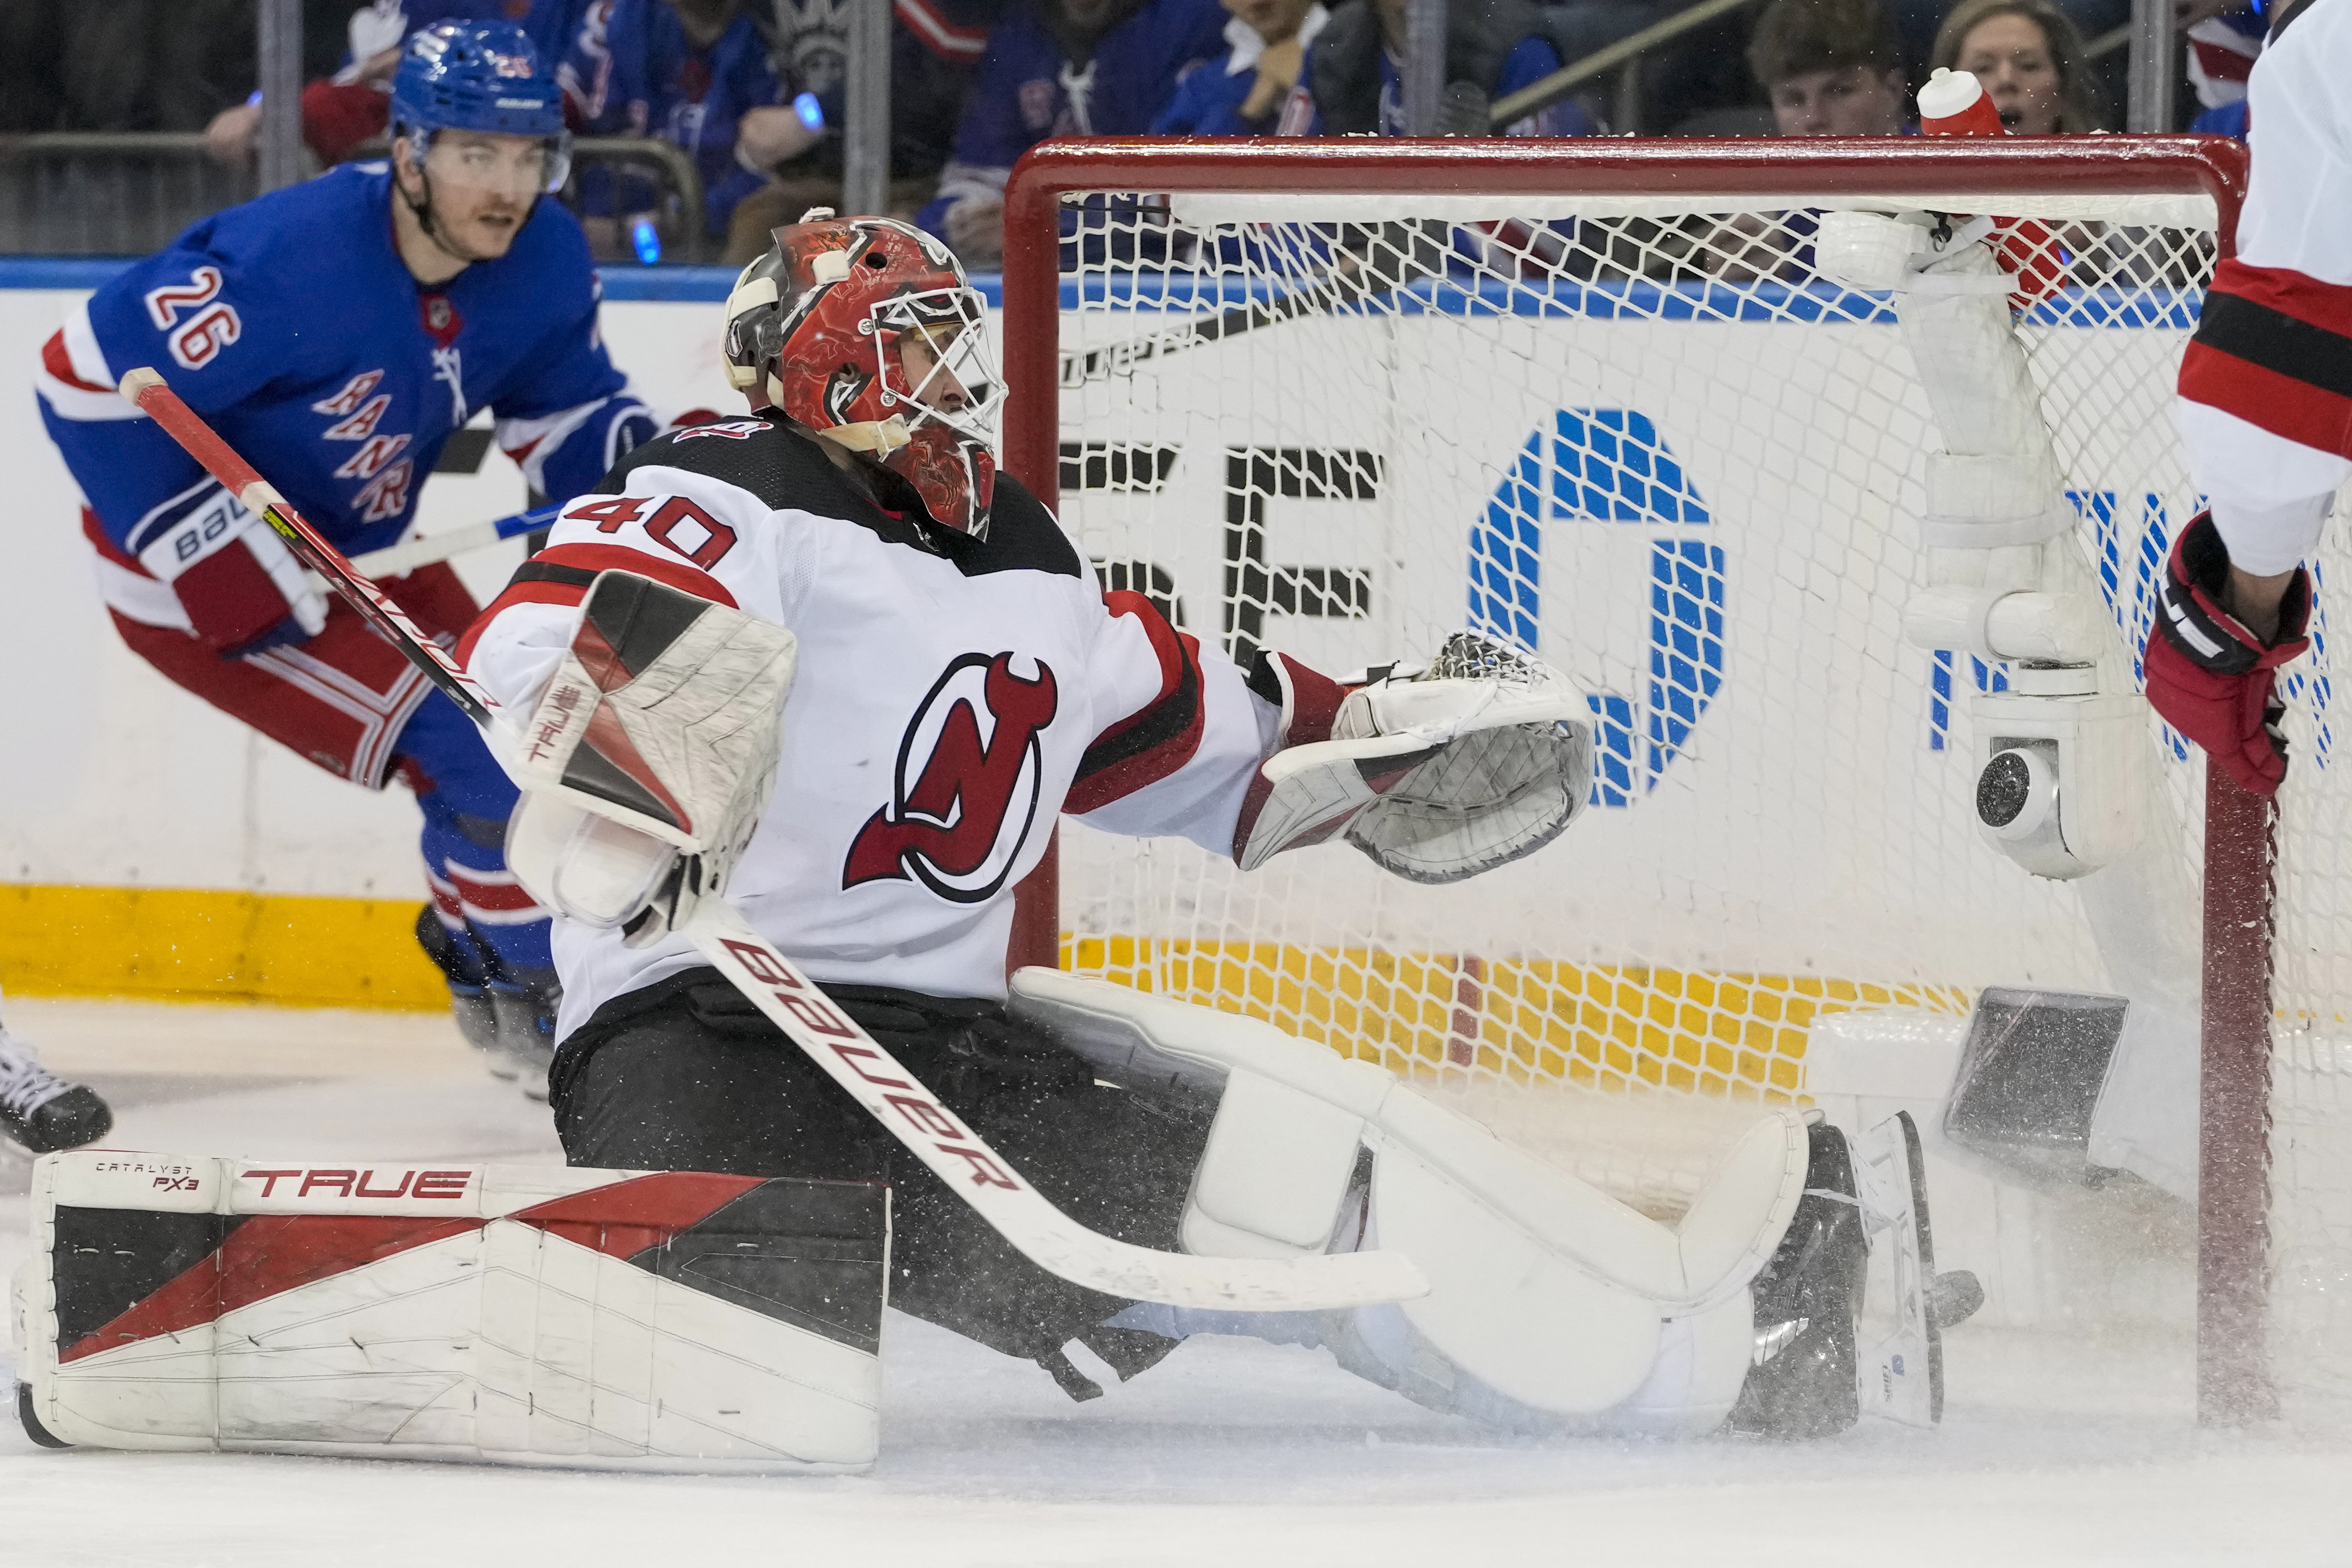 The Athletic on X: For the first time in 11 seasons, the New Jersey Devils  have won a playoff series. #NJDevils advance after beating their arch-rival  Rangers in a Game 7.  /